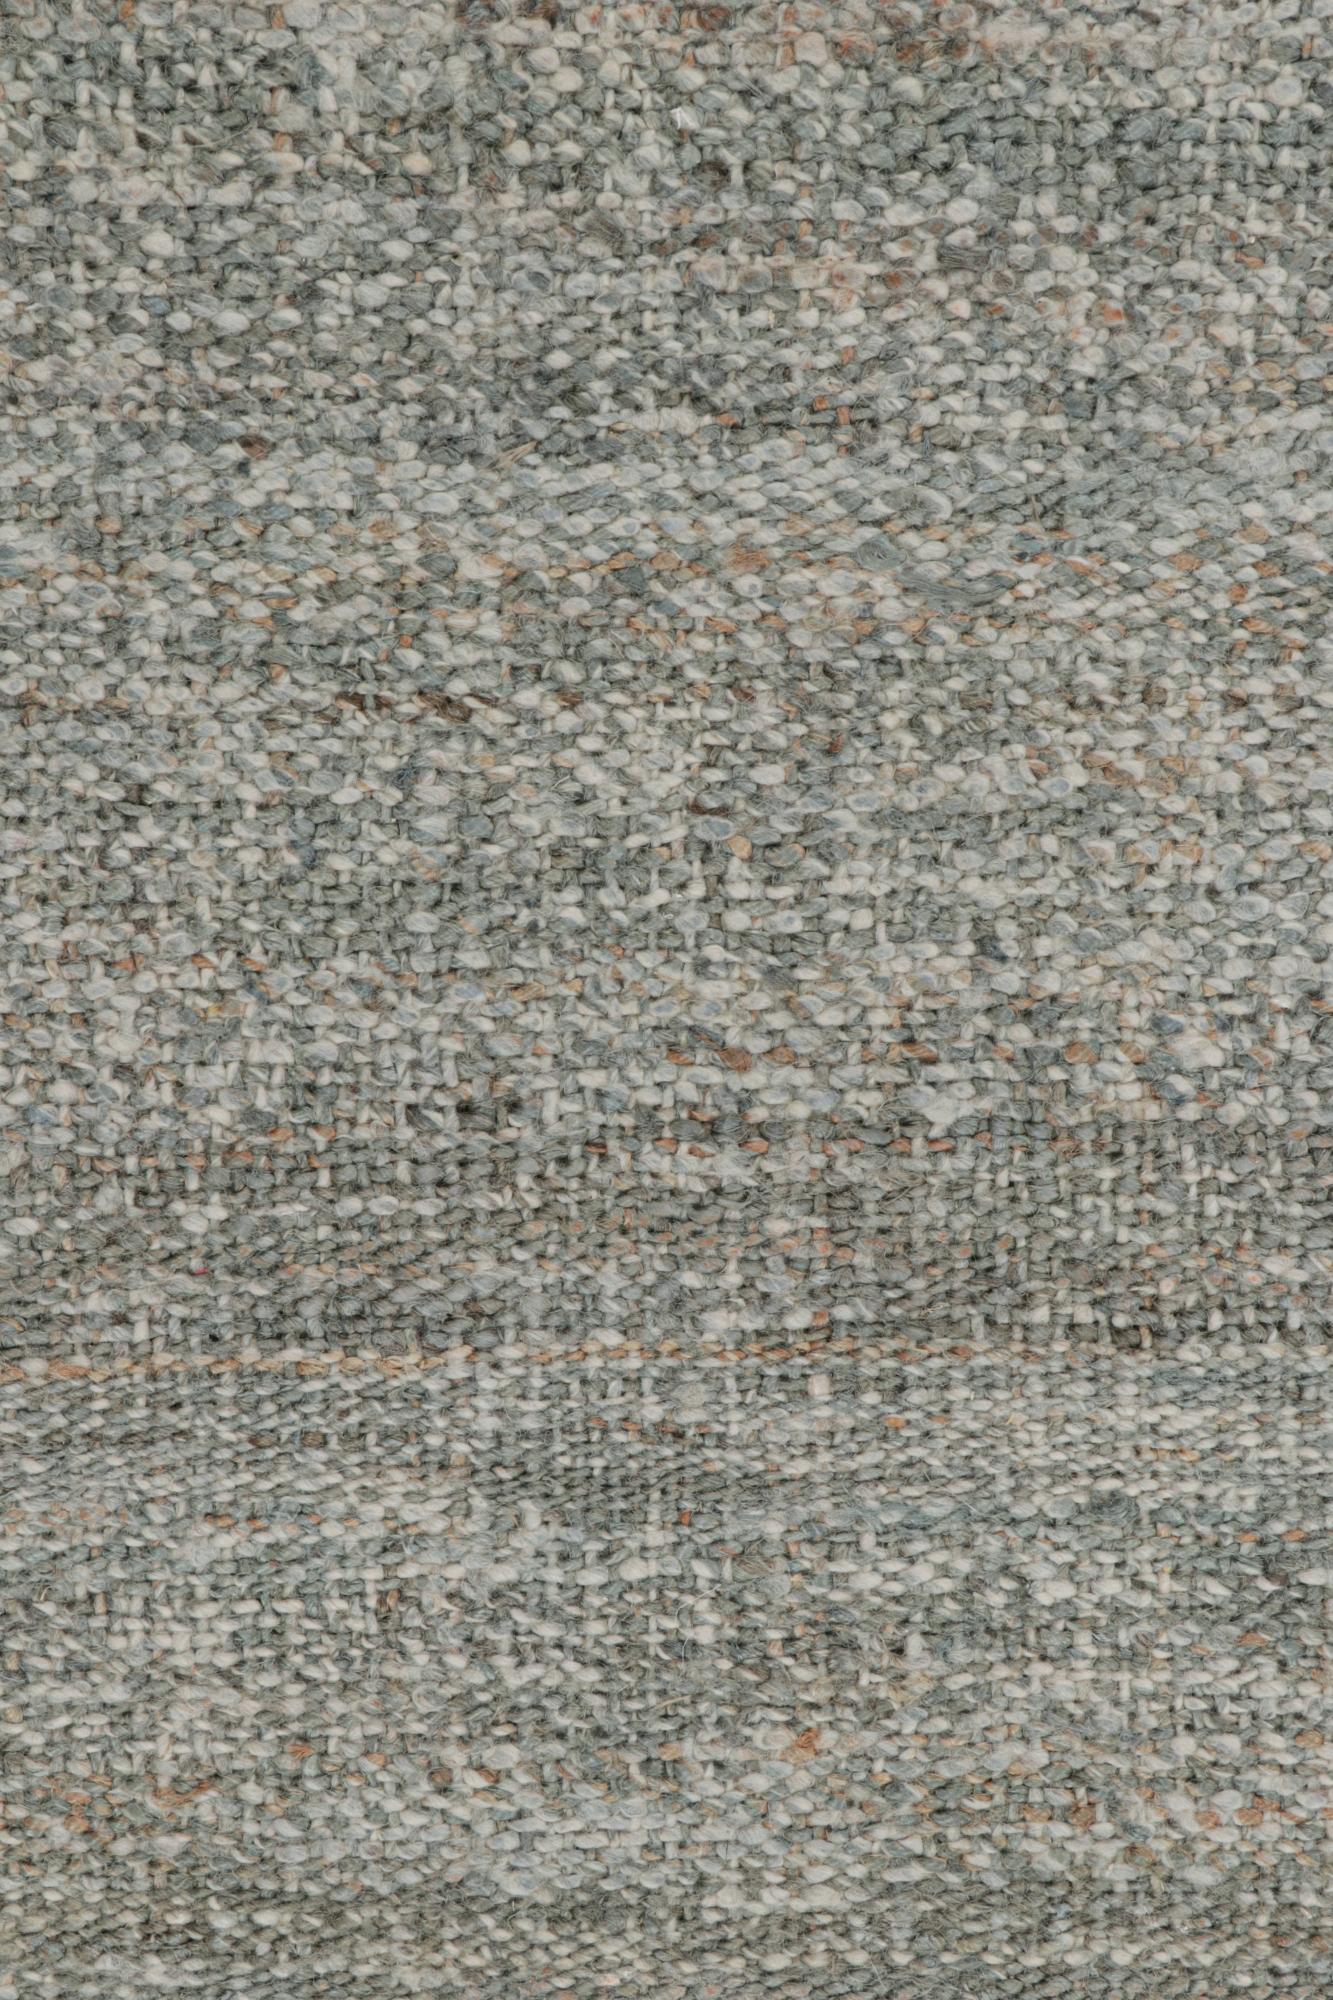 Rug & Kilim’s Contemporary Jute Kilim in Tones of Gray In New Condition For Sale In Long Island City, NY